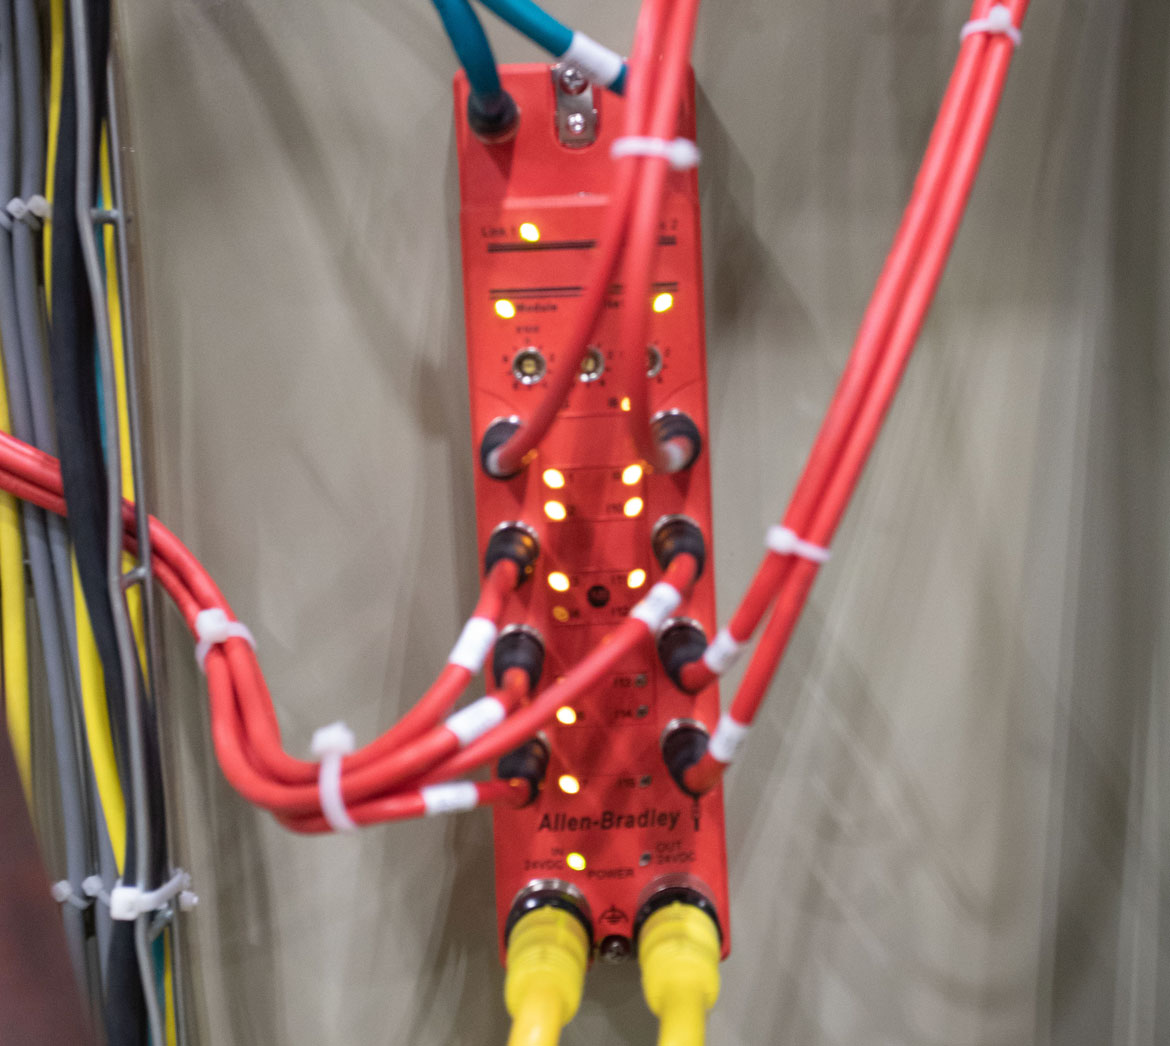 Connectivity, automated blasting systems, automated solutions